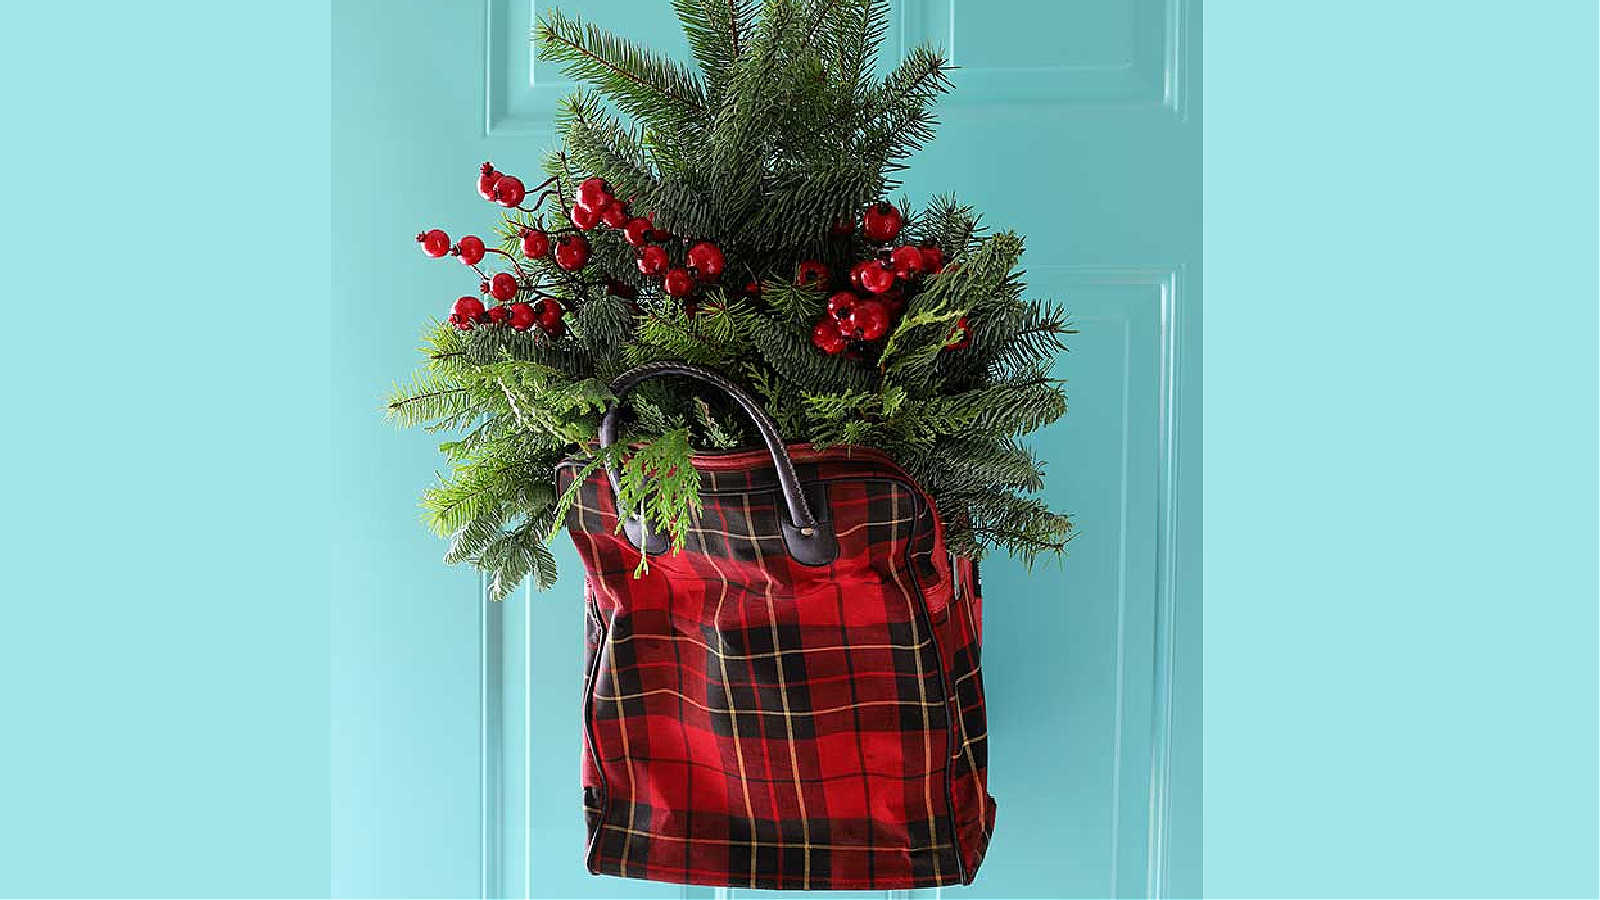 vintage plaid bag as a door hanger for Christmas